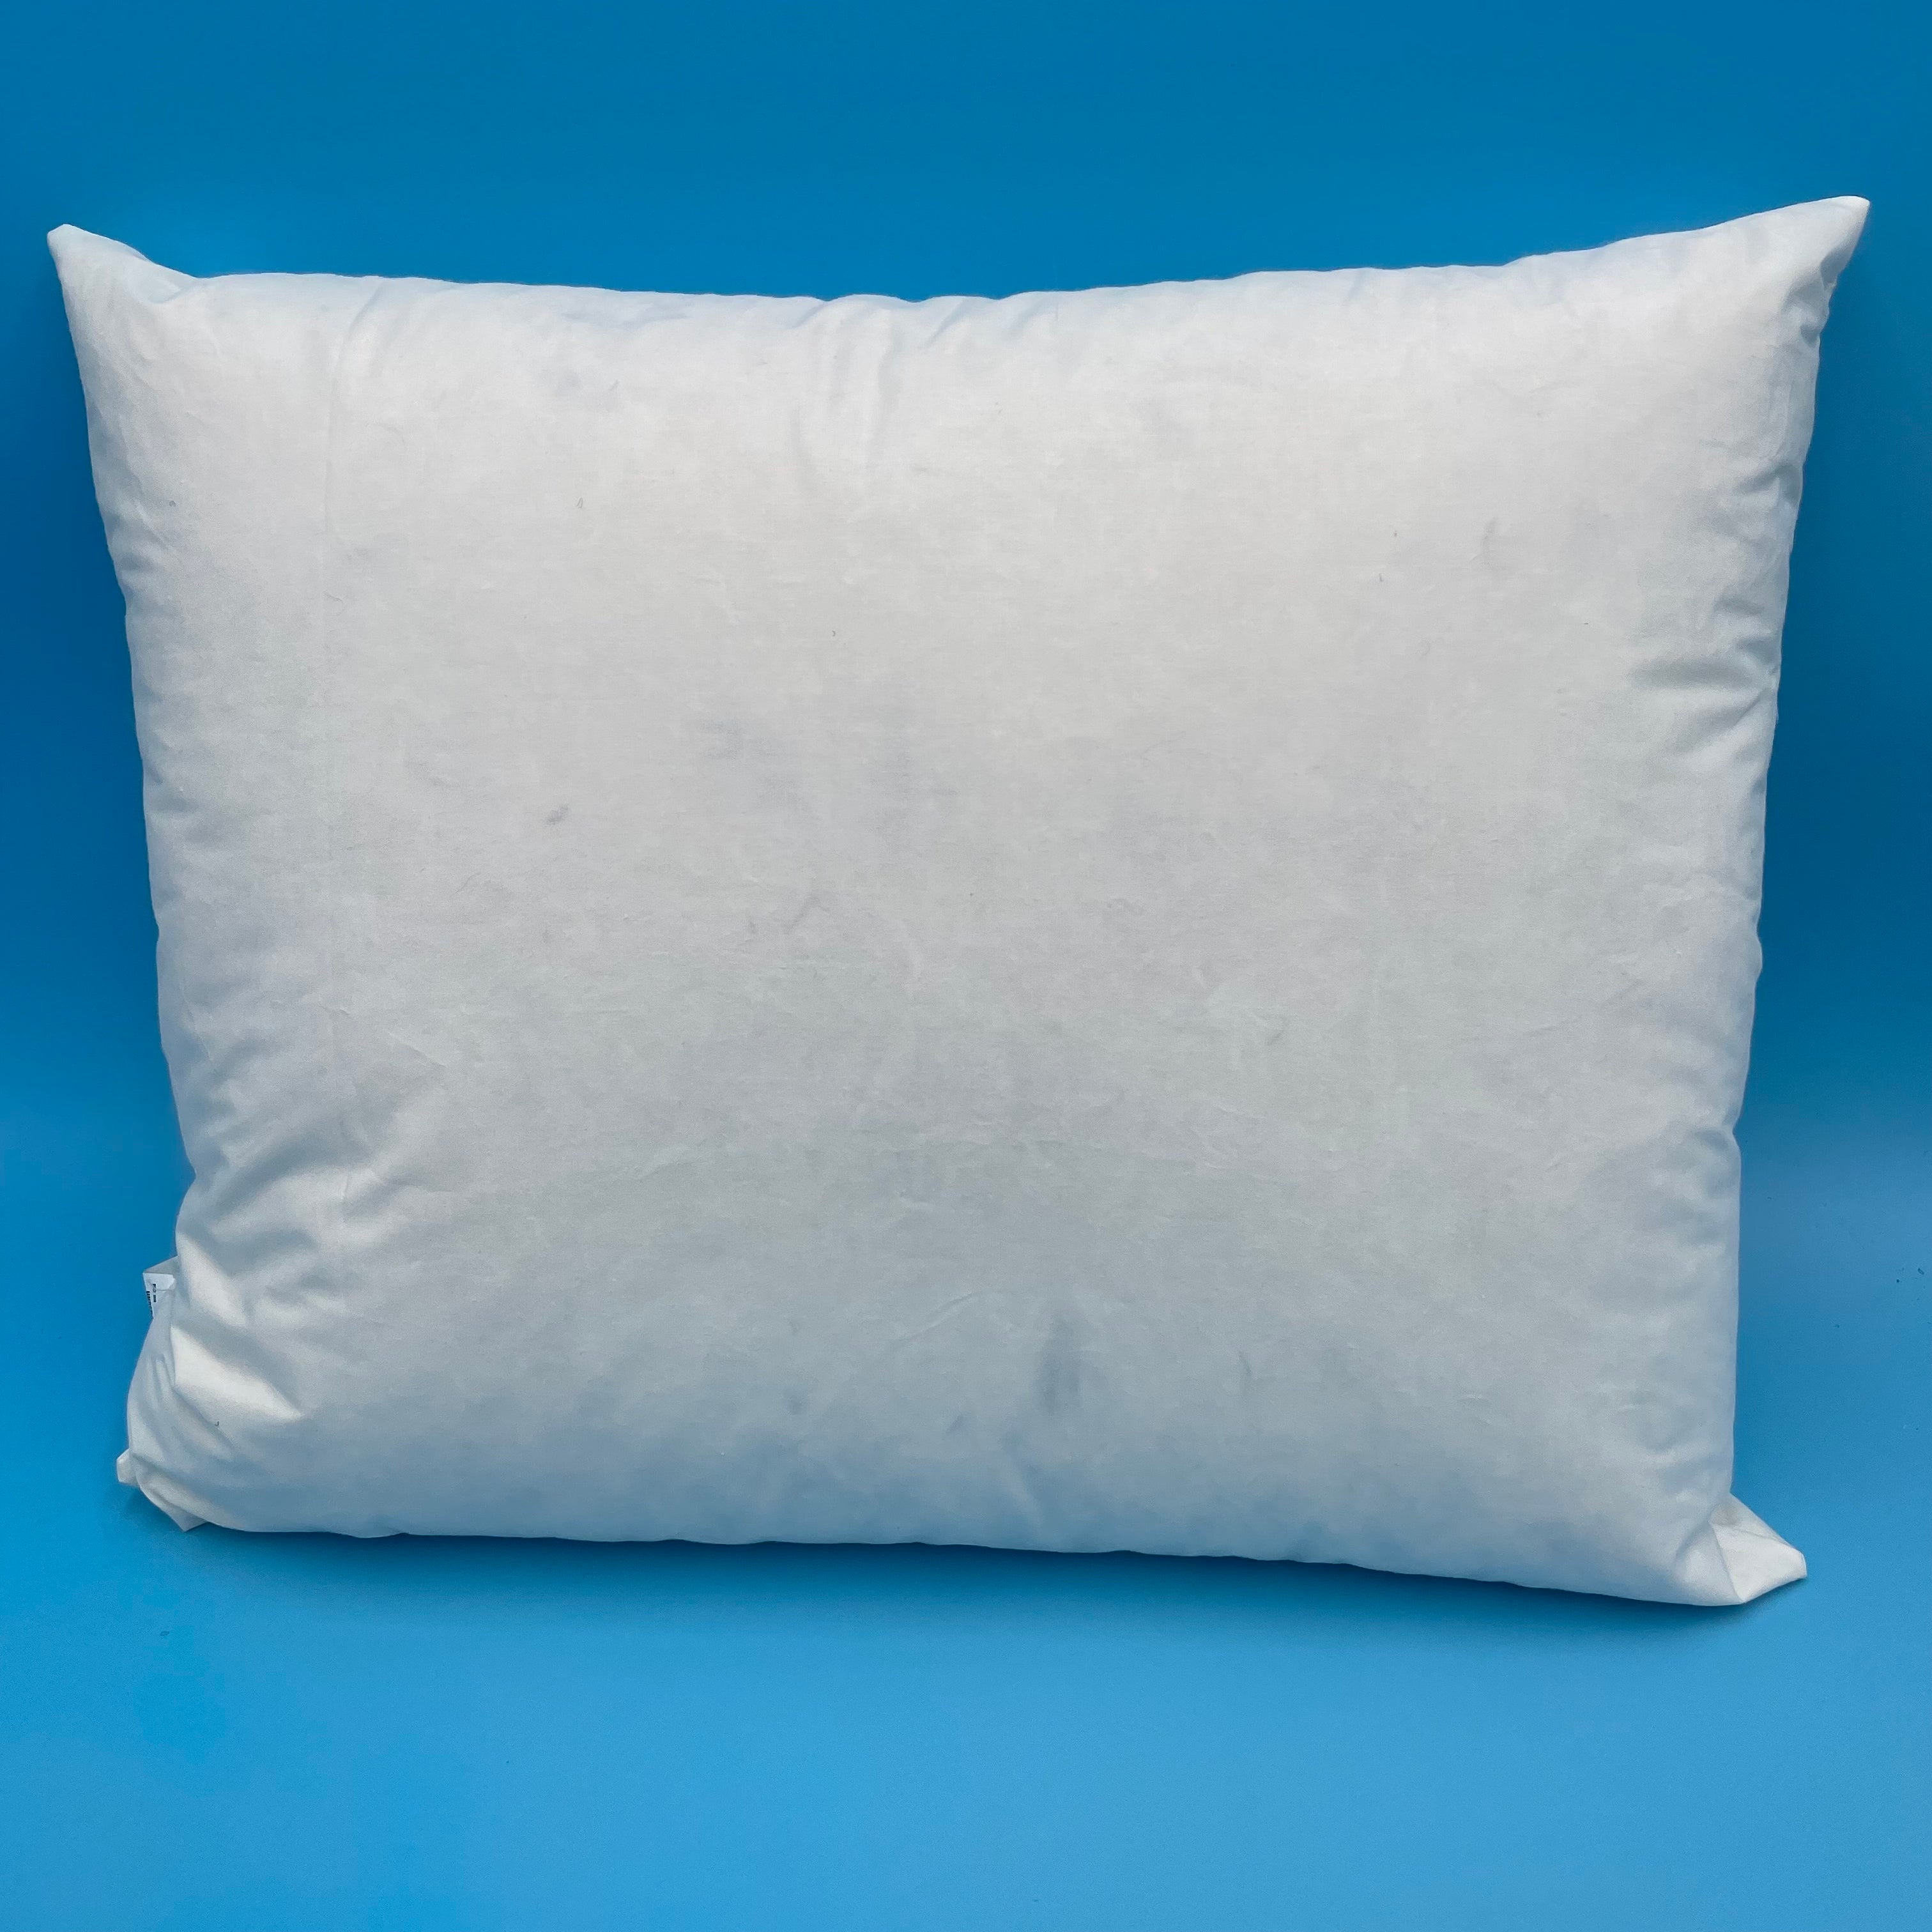 25/75 Down Feather Pillow Insert